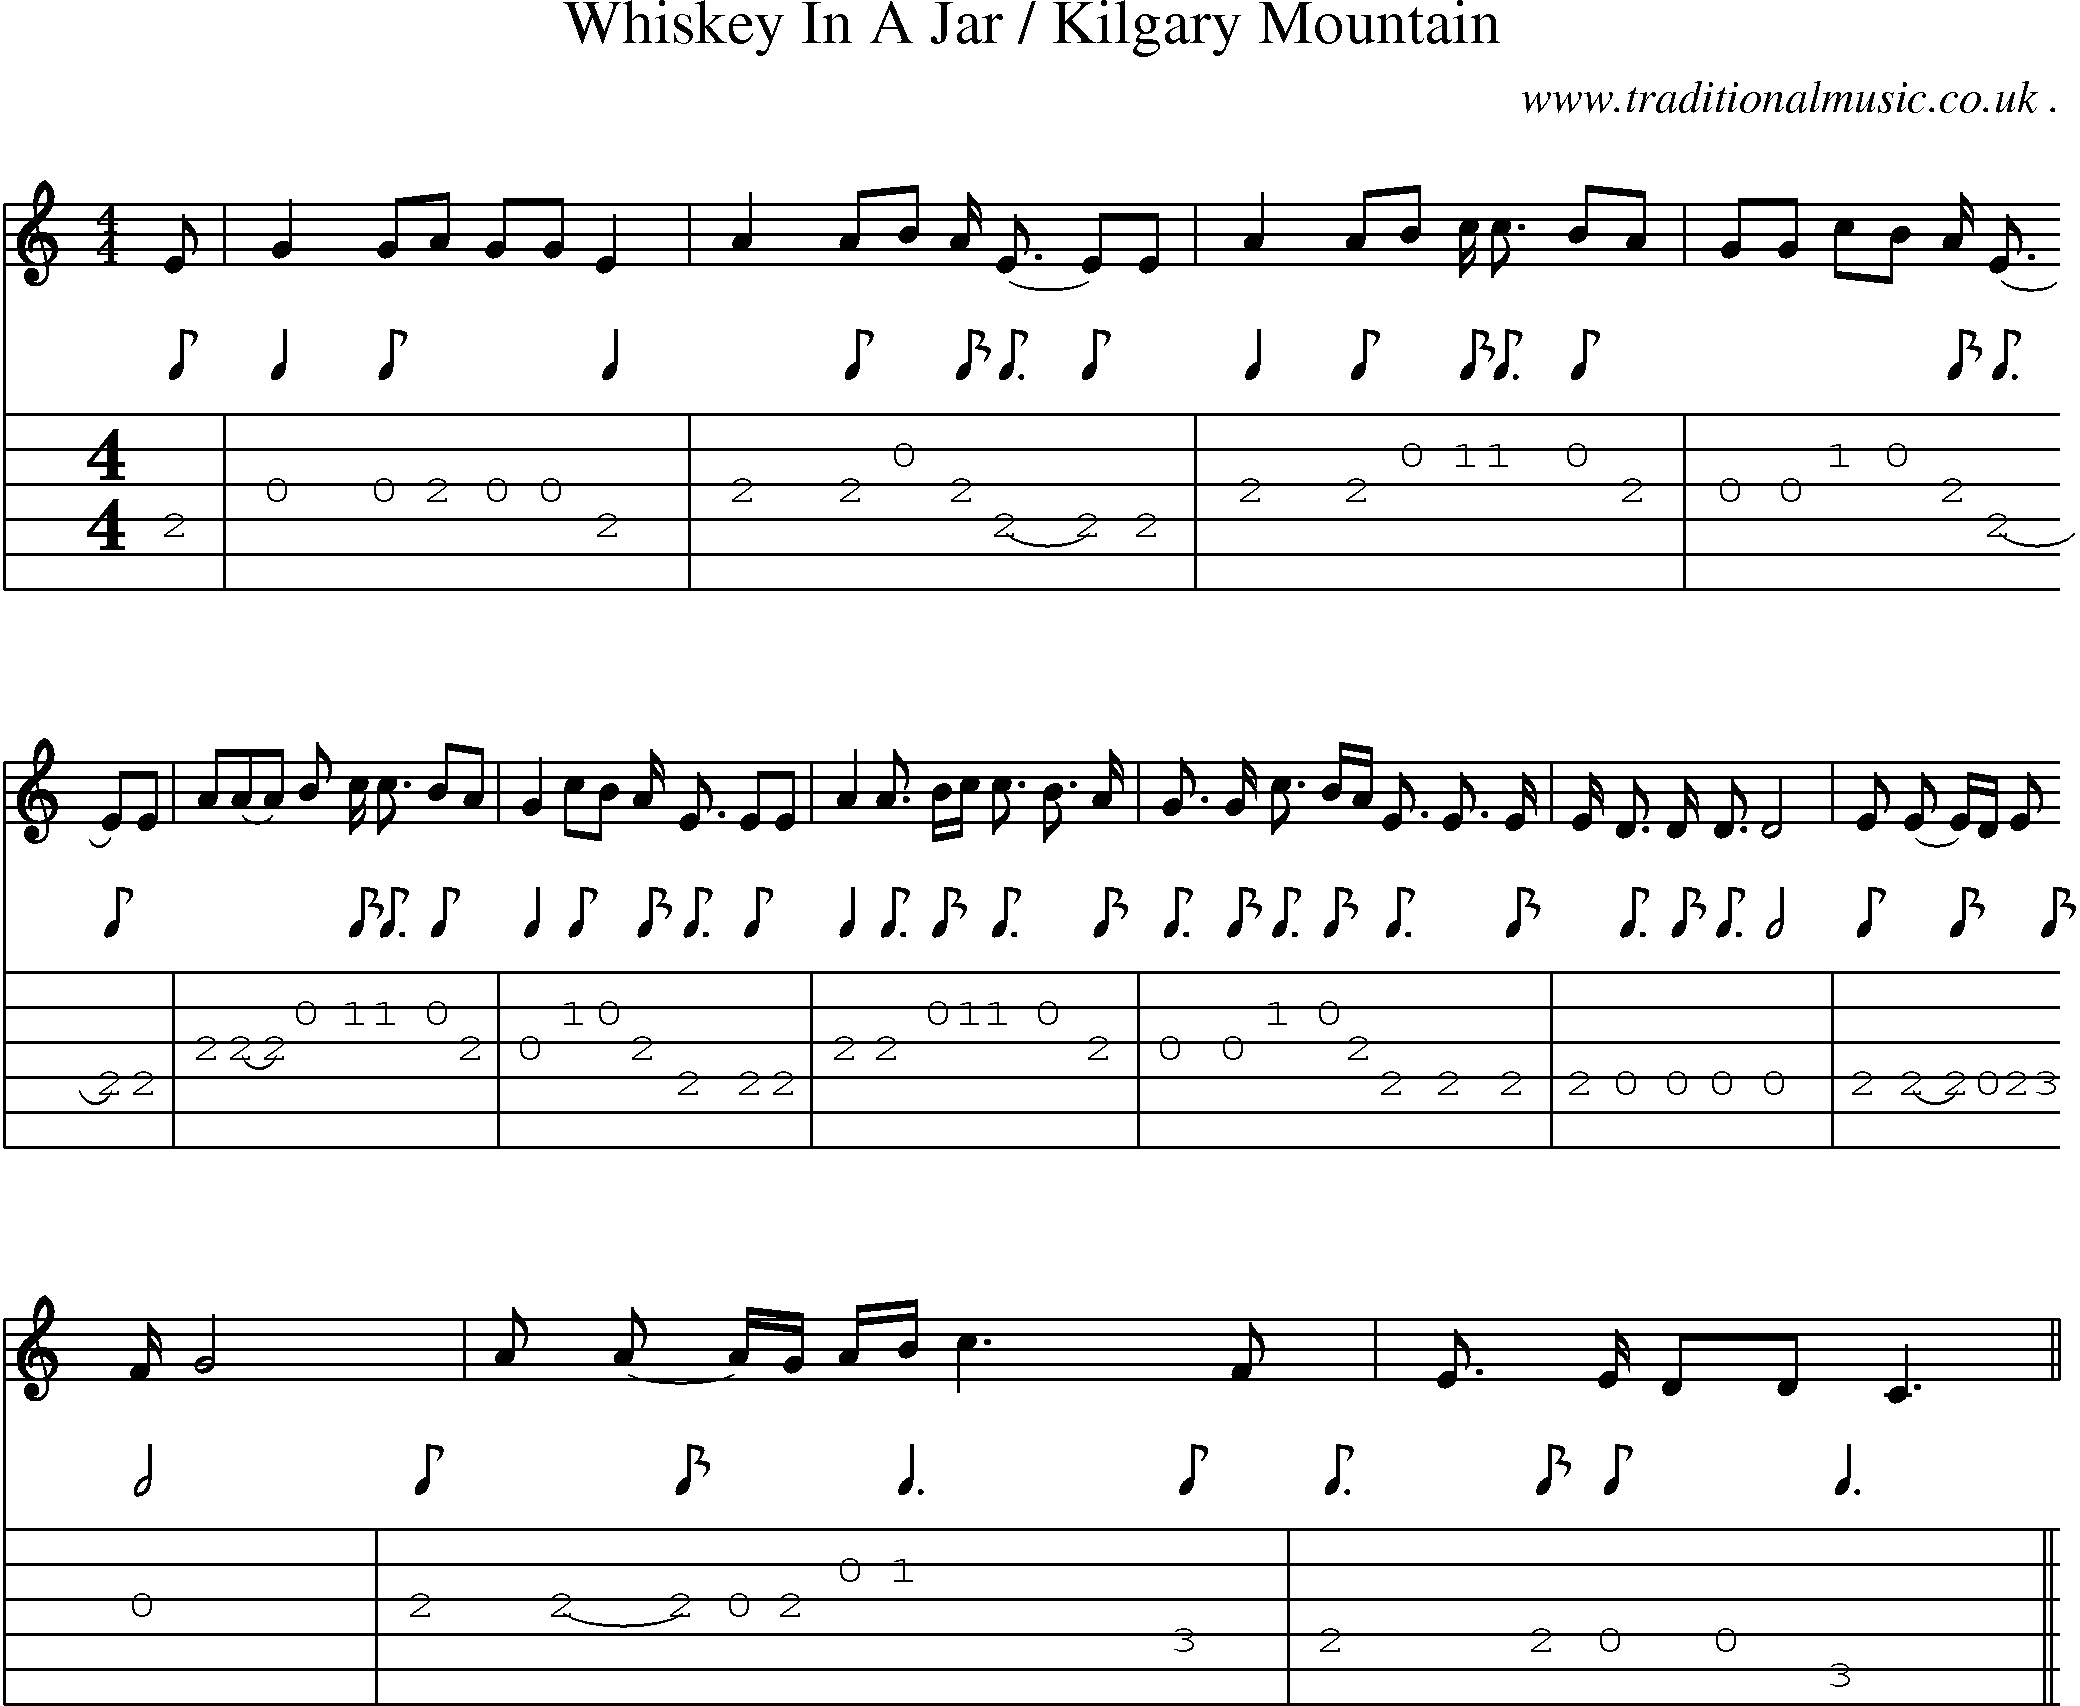 Sheet-music  score, Chords and Guitar Tabs for Whiskey In A Jar Kilgary Mountain